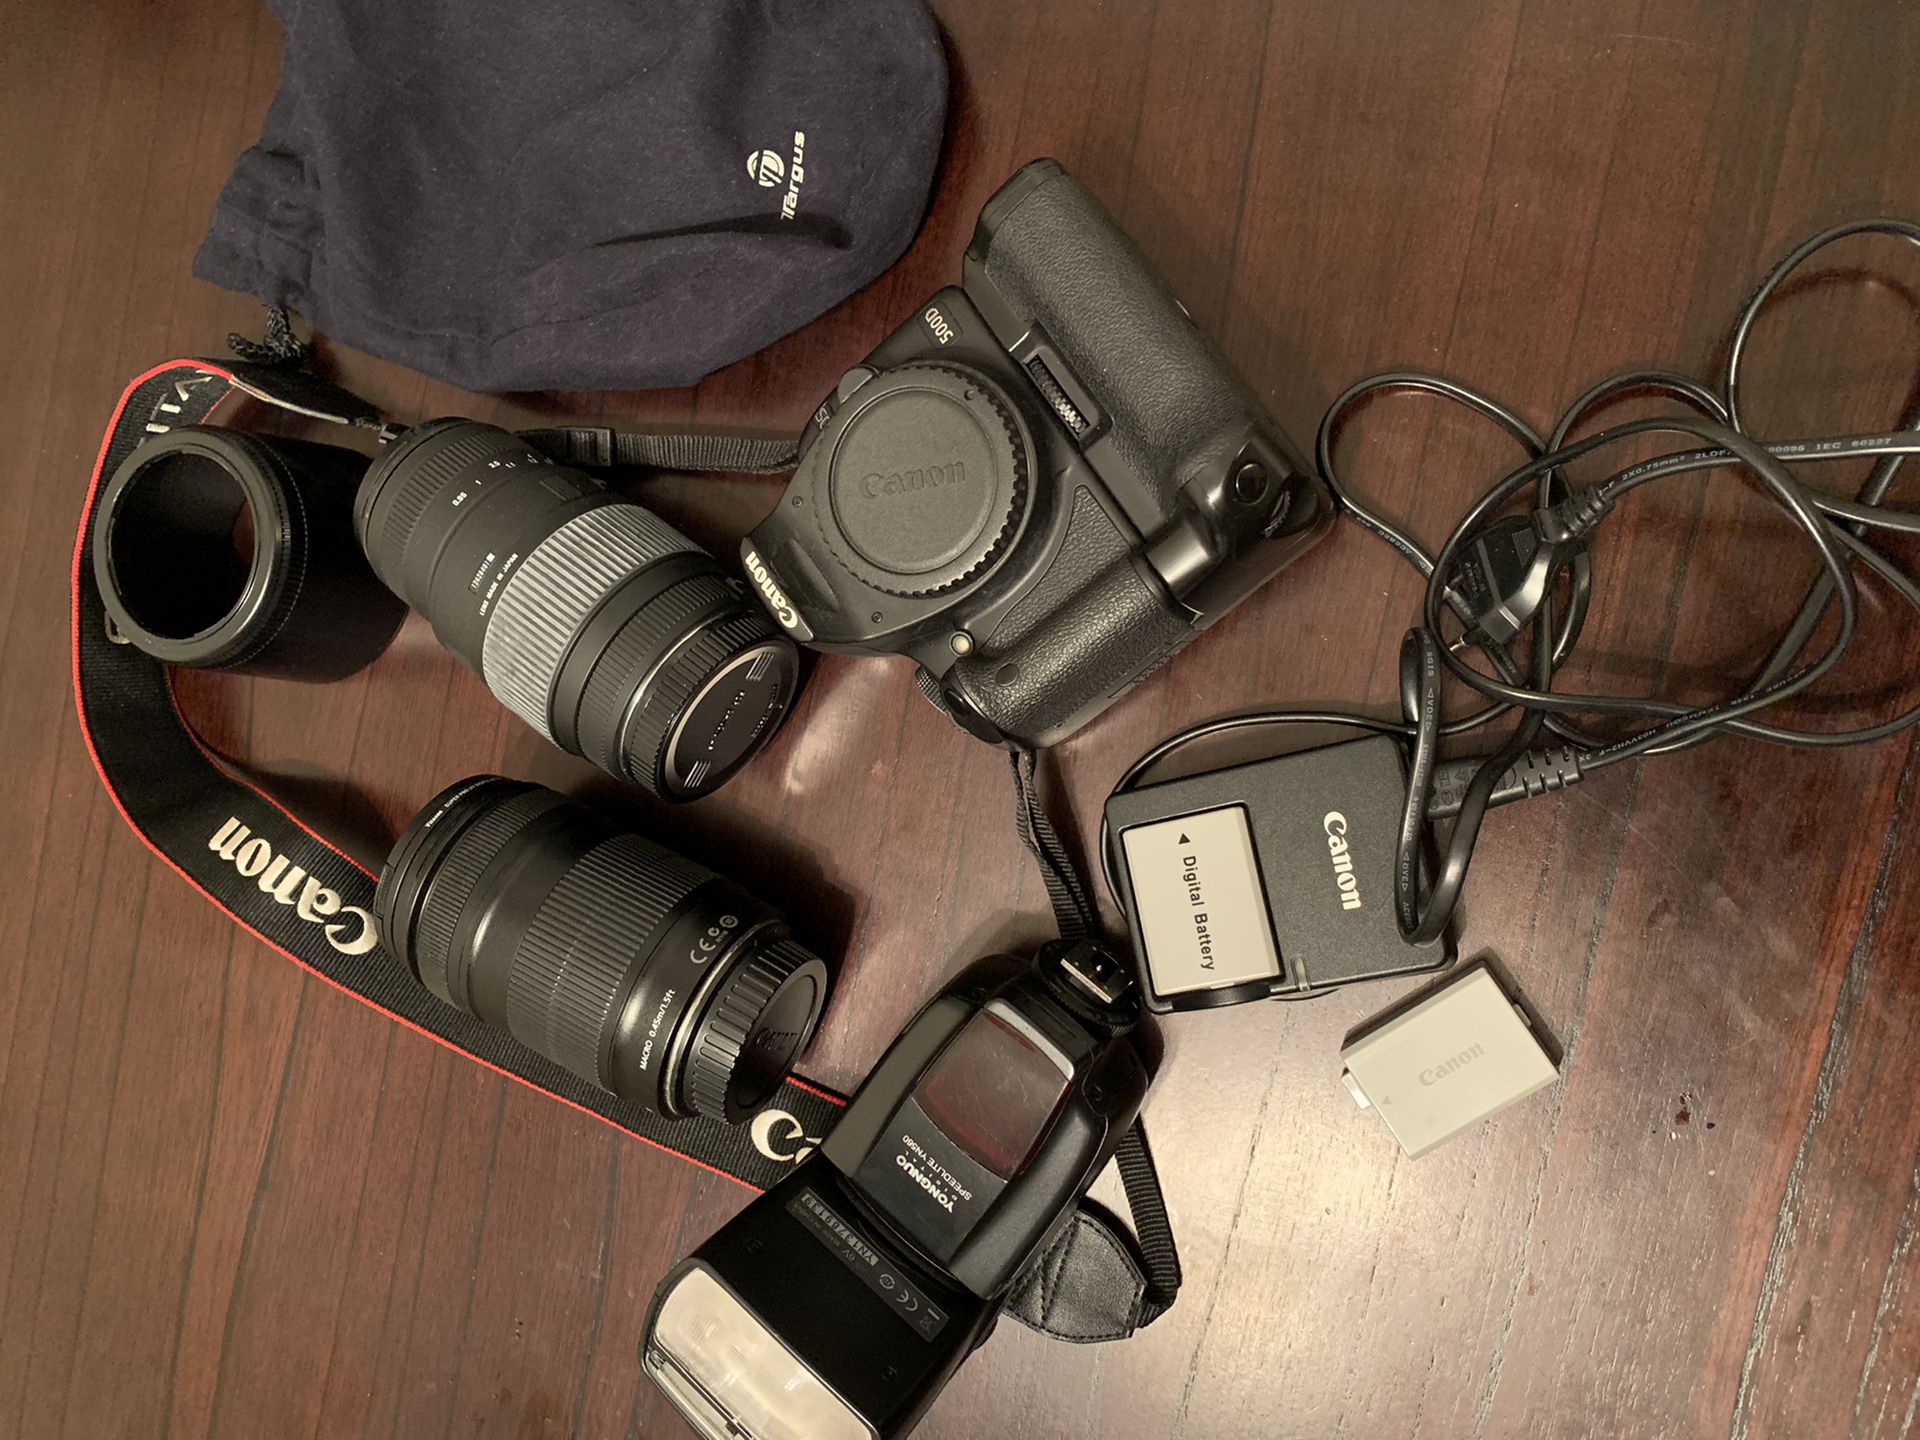 Canon EOS 500D with 2 Lens, camera extender, battery charger and everything.